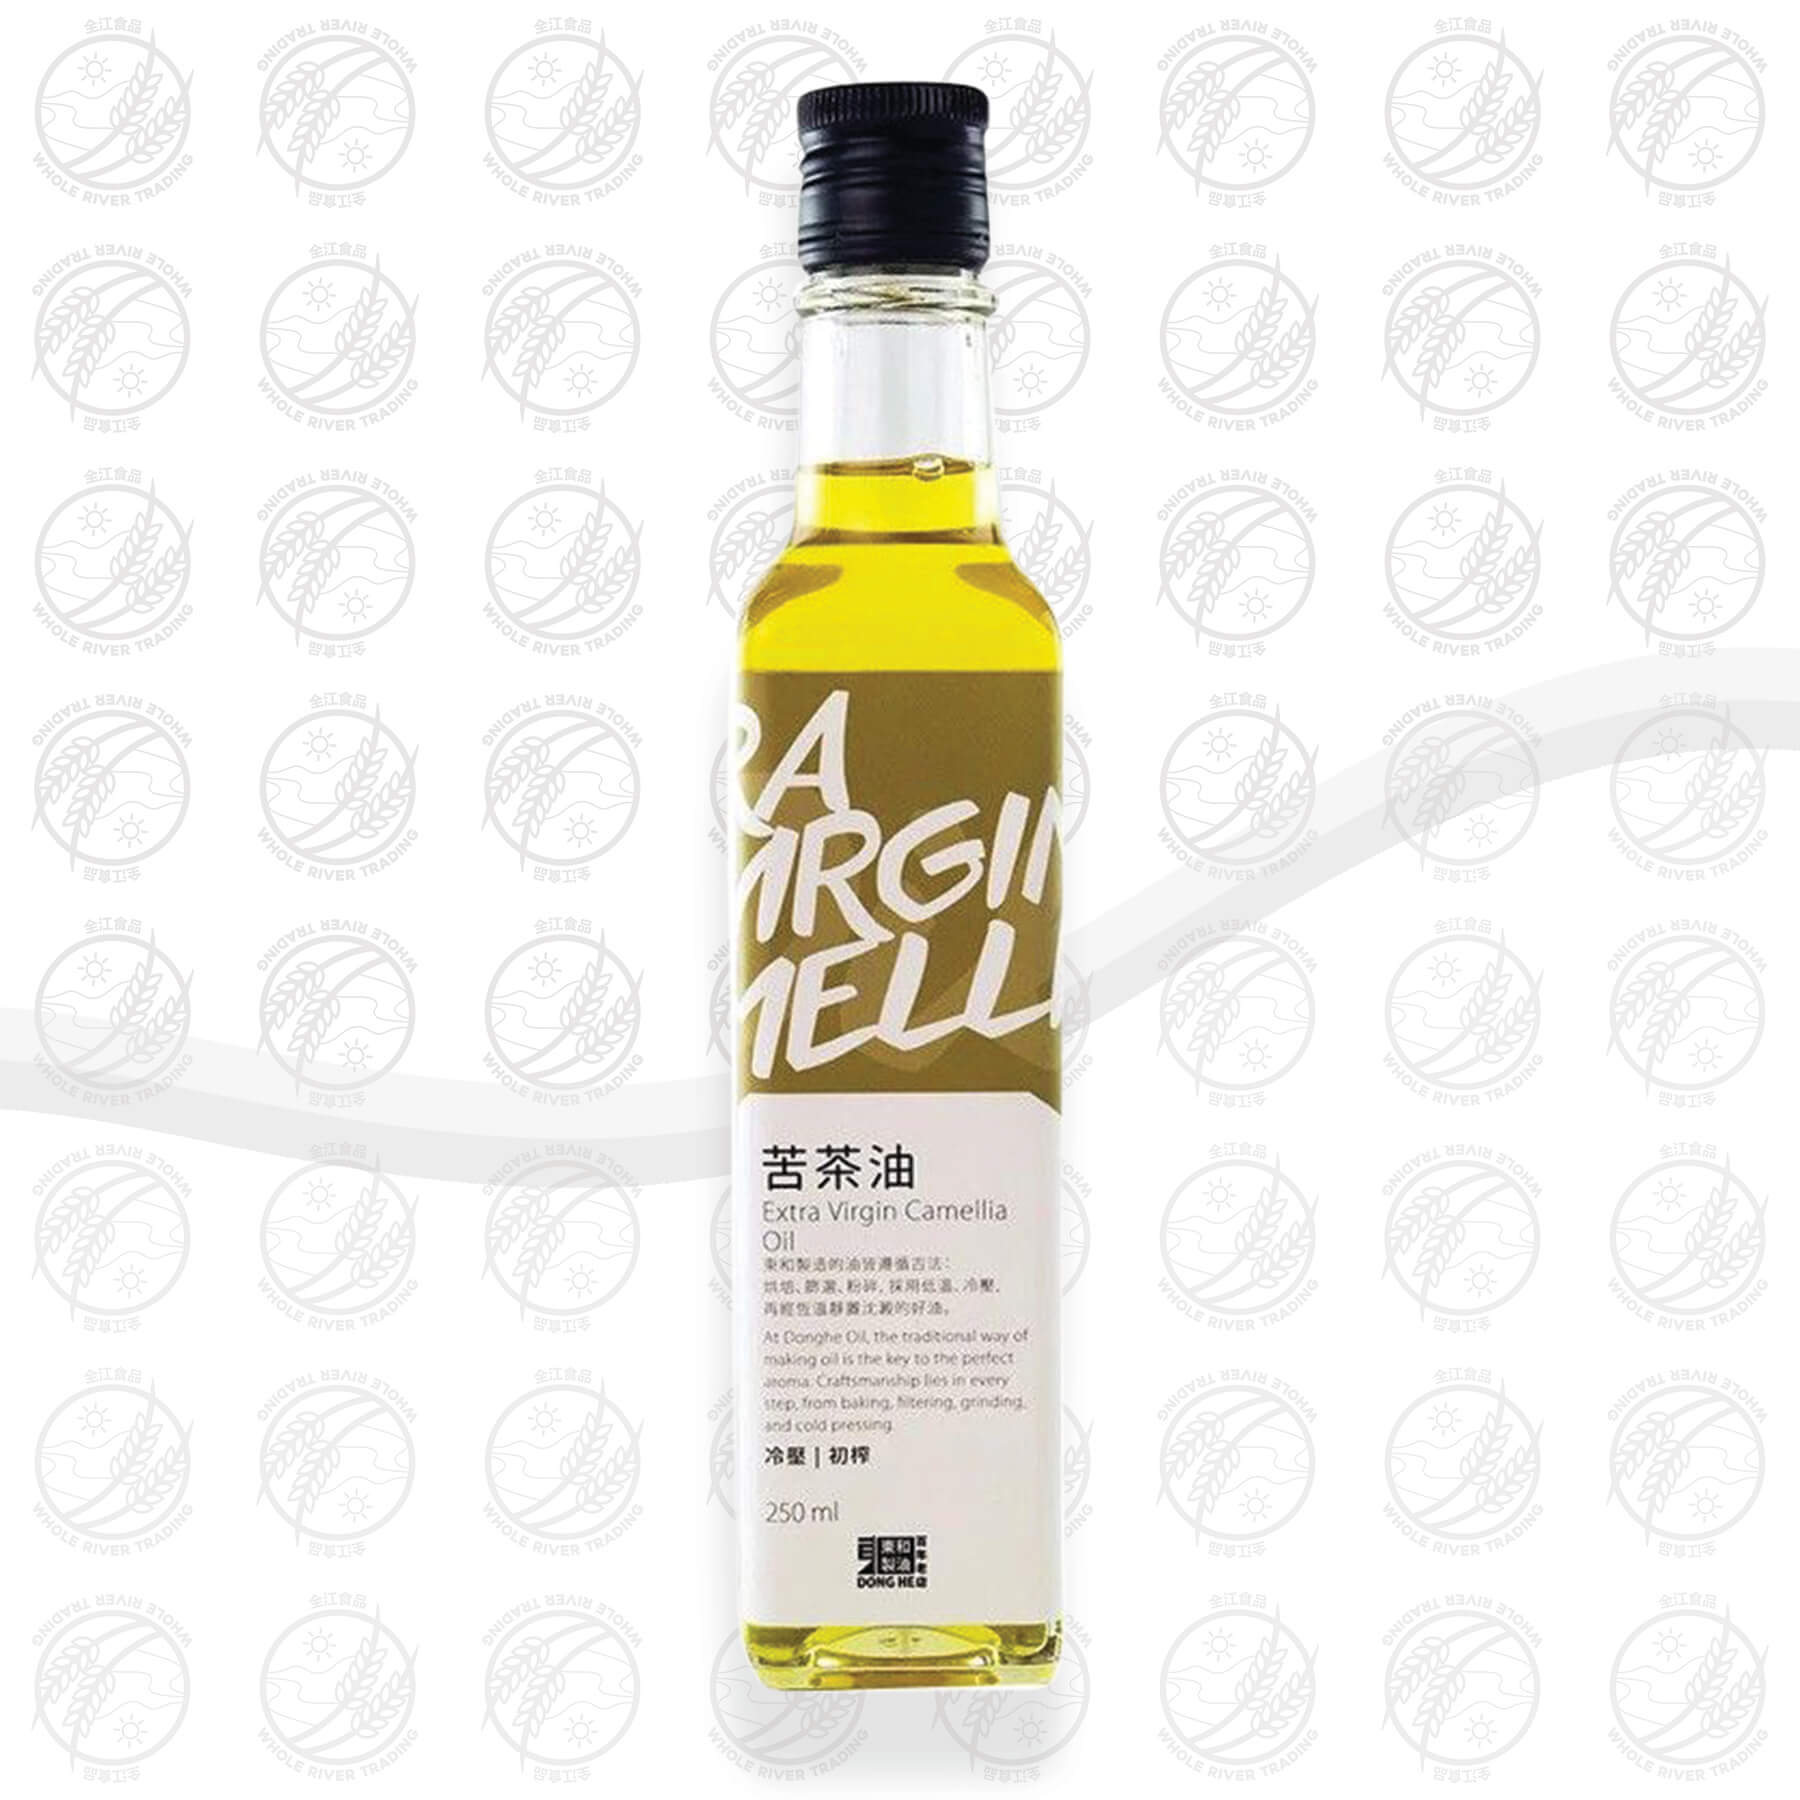 DONGHE EXTRA VIRGIN CAMELLIA OIL / 東和苦茶油250ml – Whole River